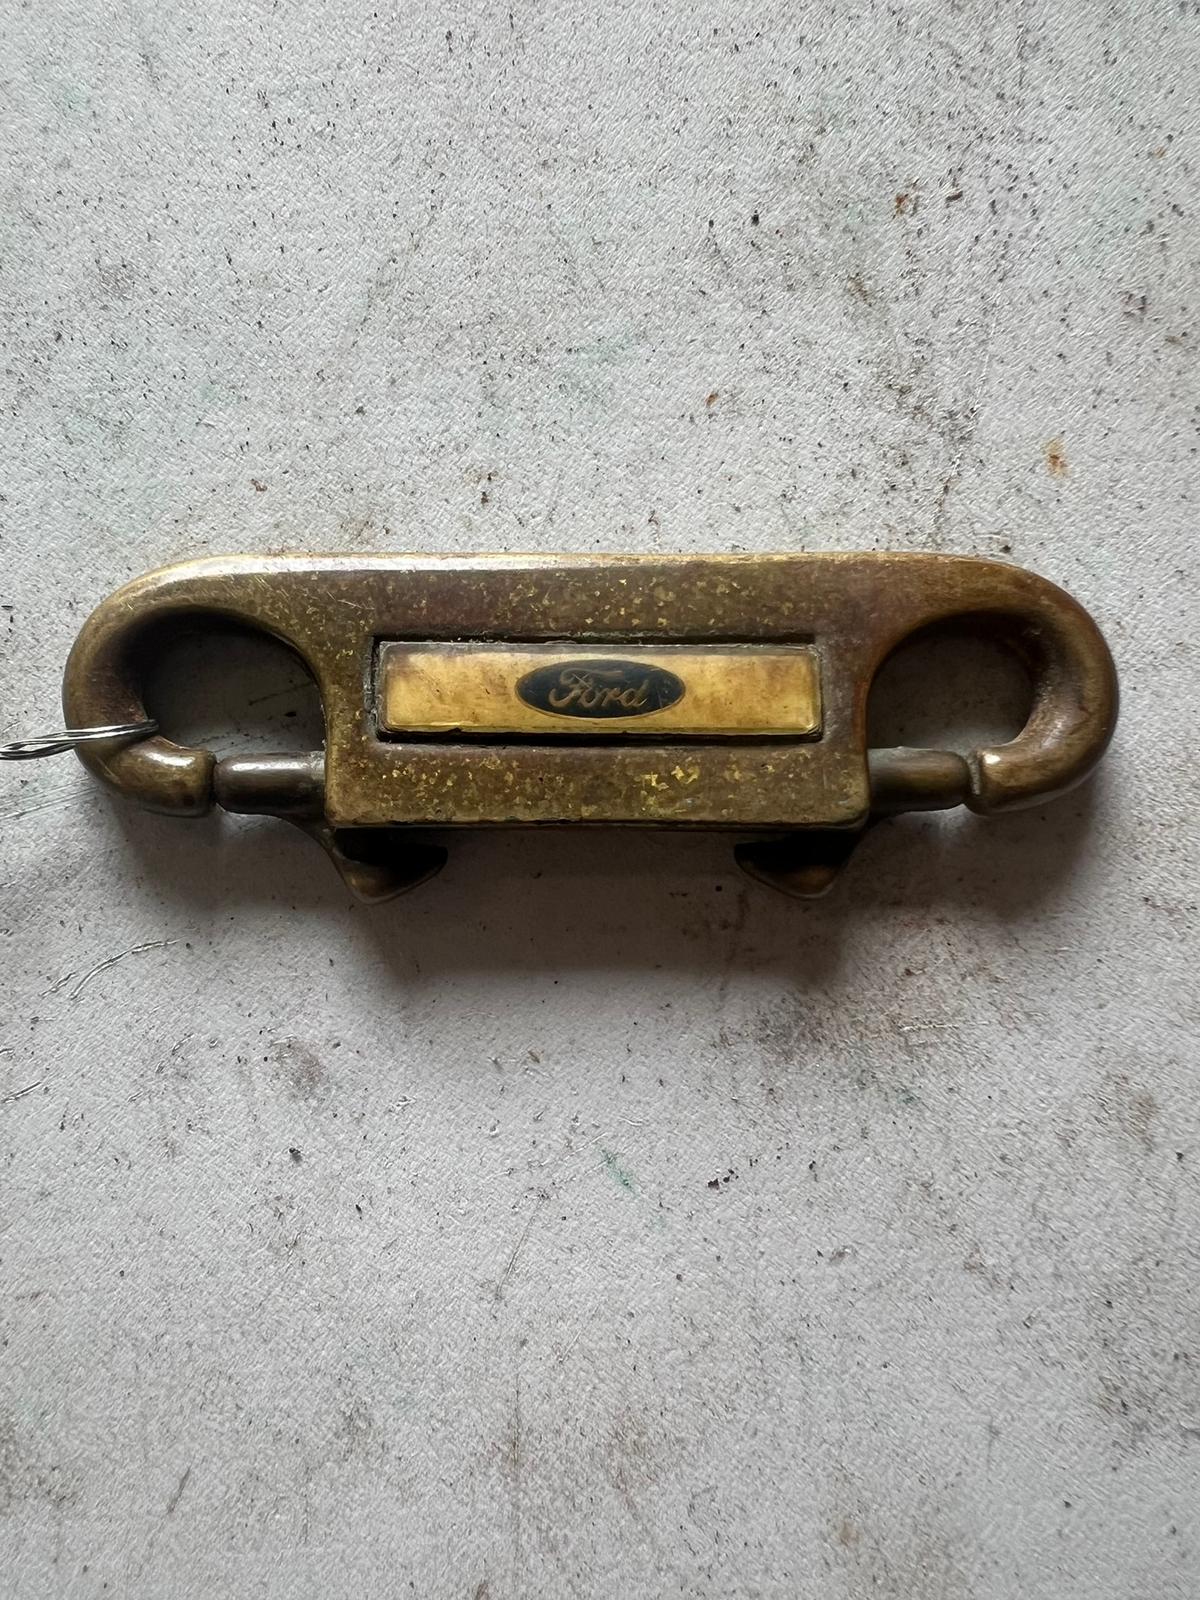 Ford Brass Dual Shop Ring